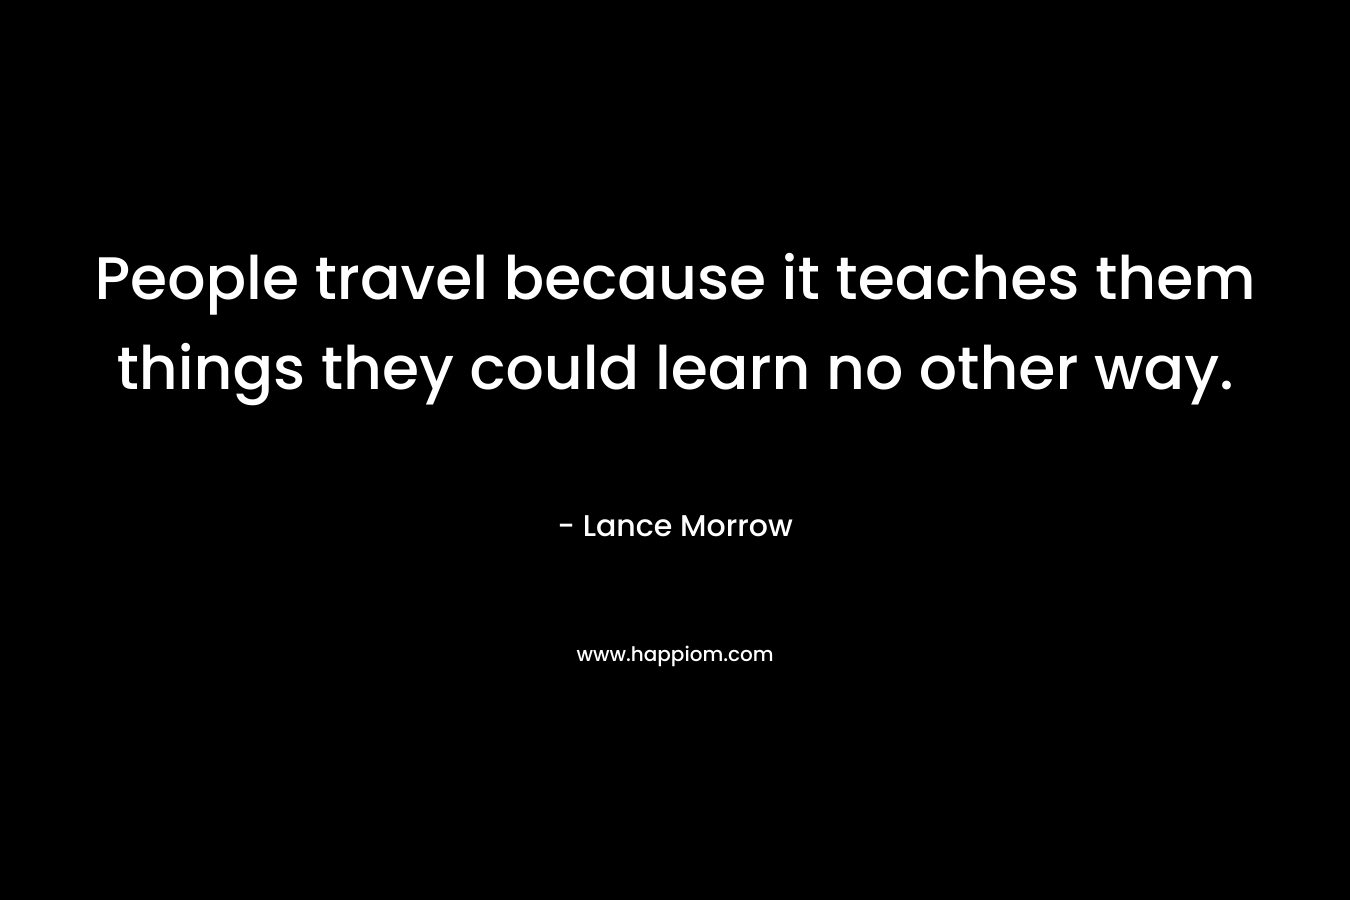 People travel because it teaches them things they could learn no other way.